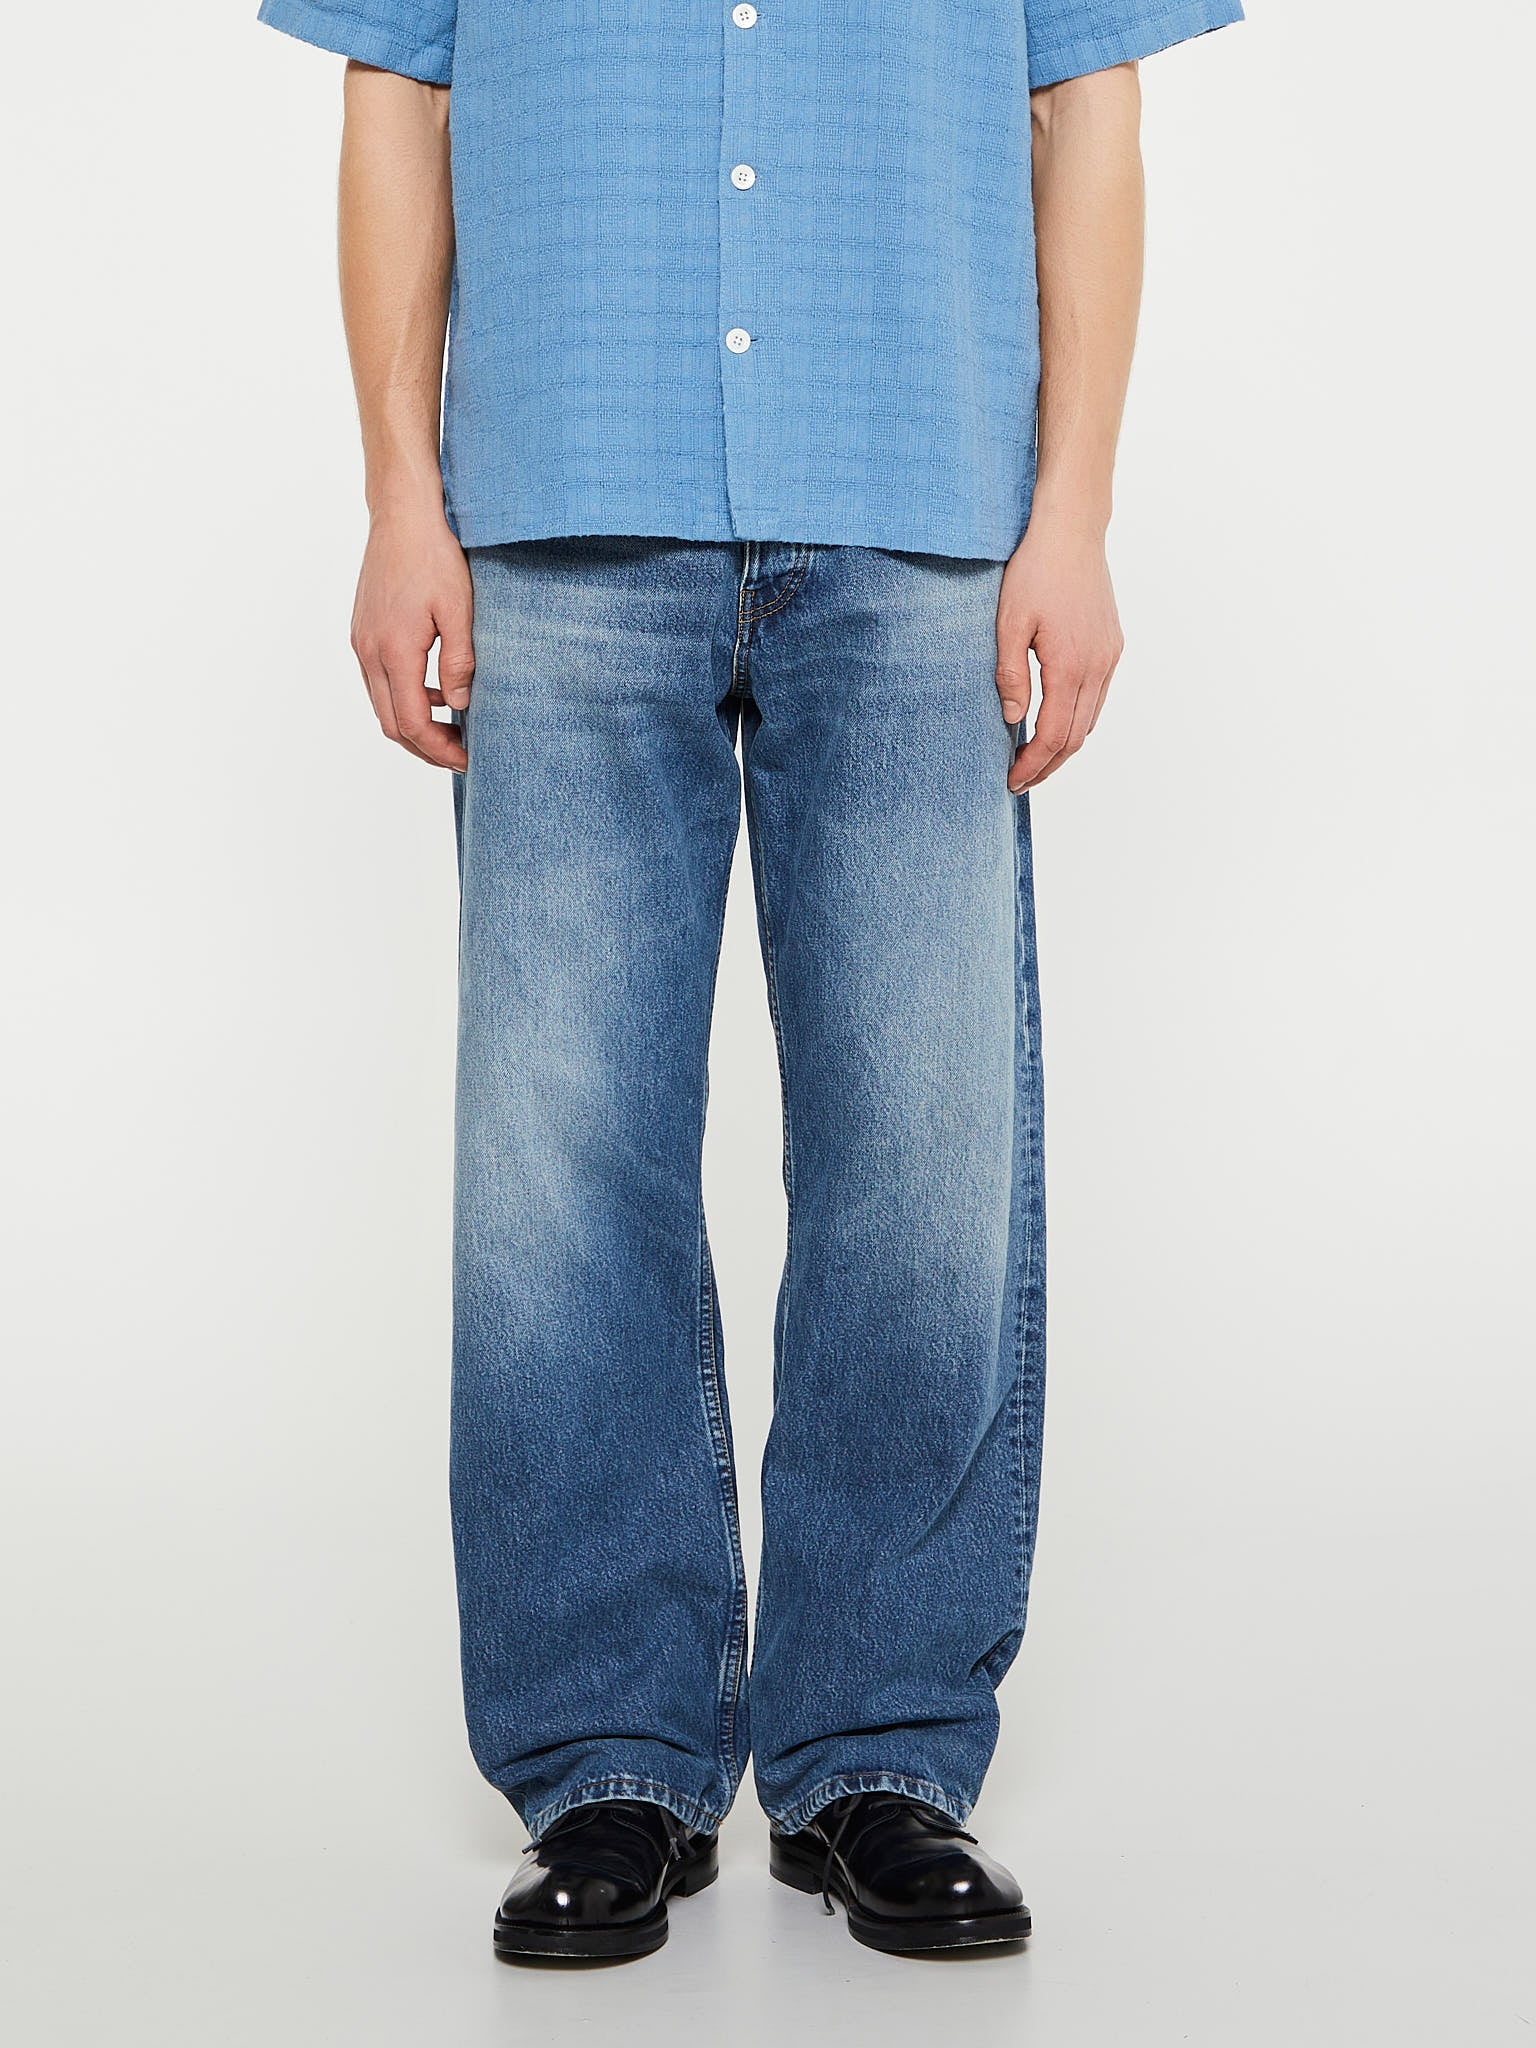 kolosunflower classic loose fit jeans